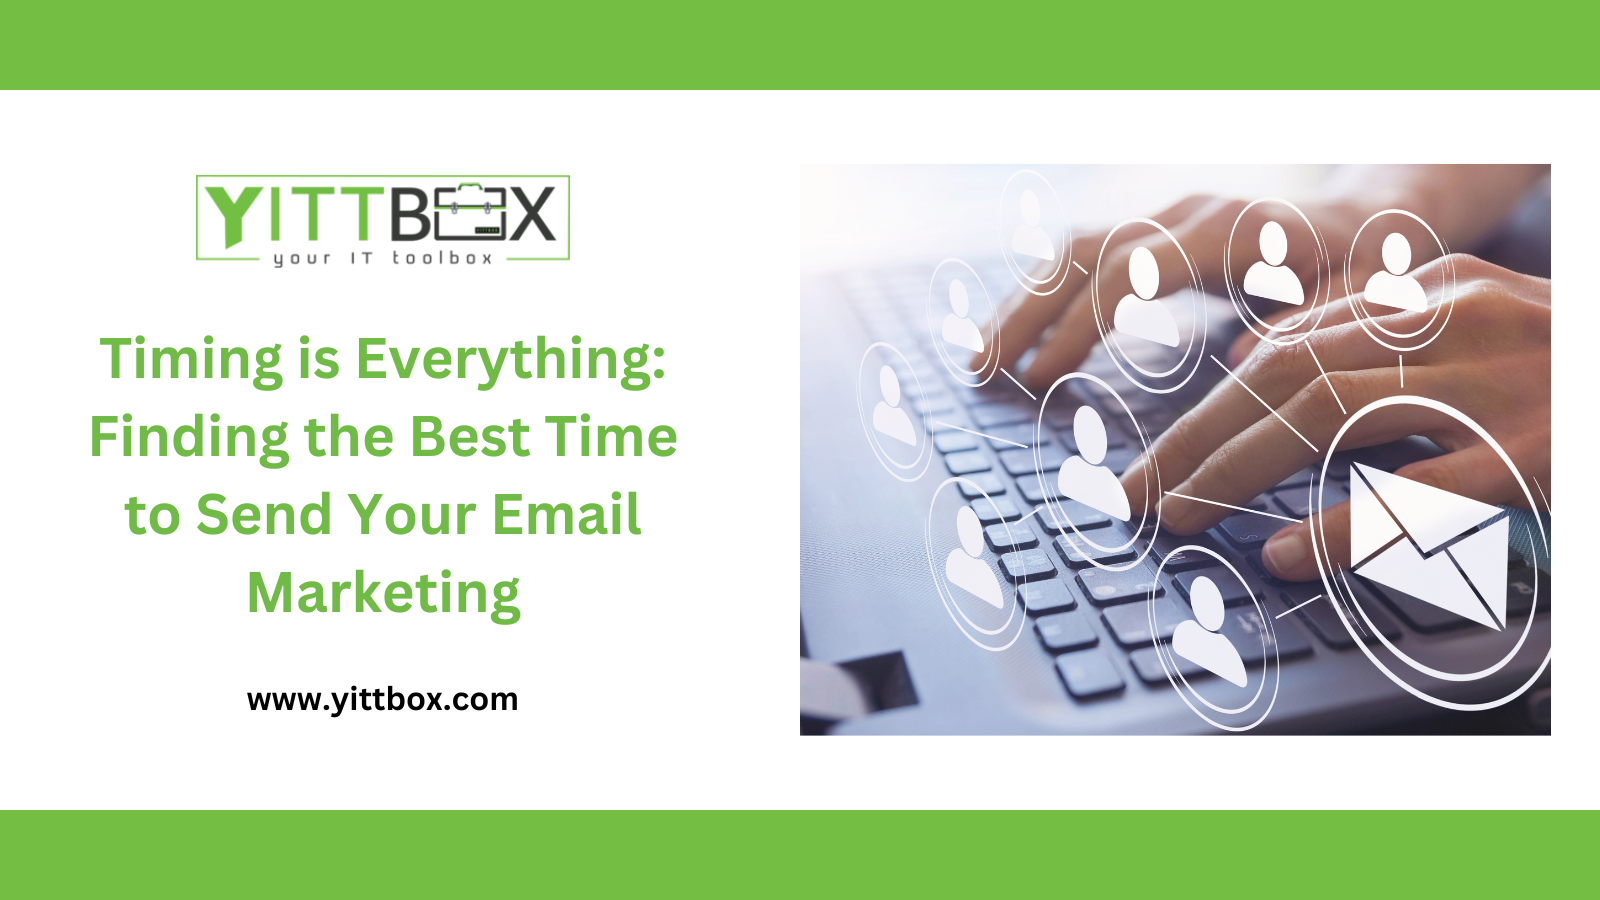 Timing is Everything: Finding the Best Time to Send Your Email Marketing